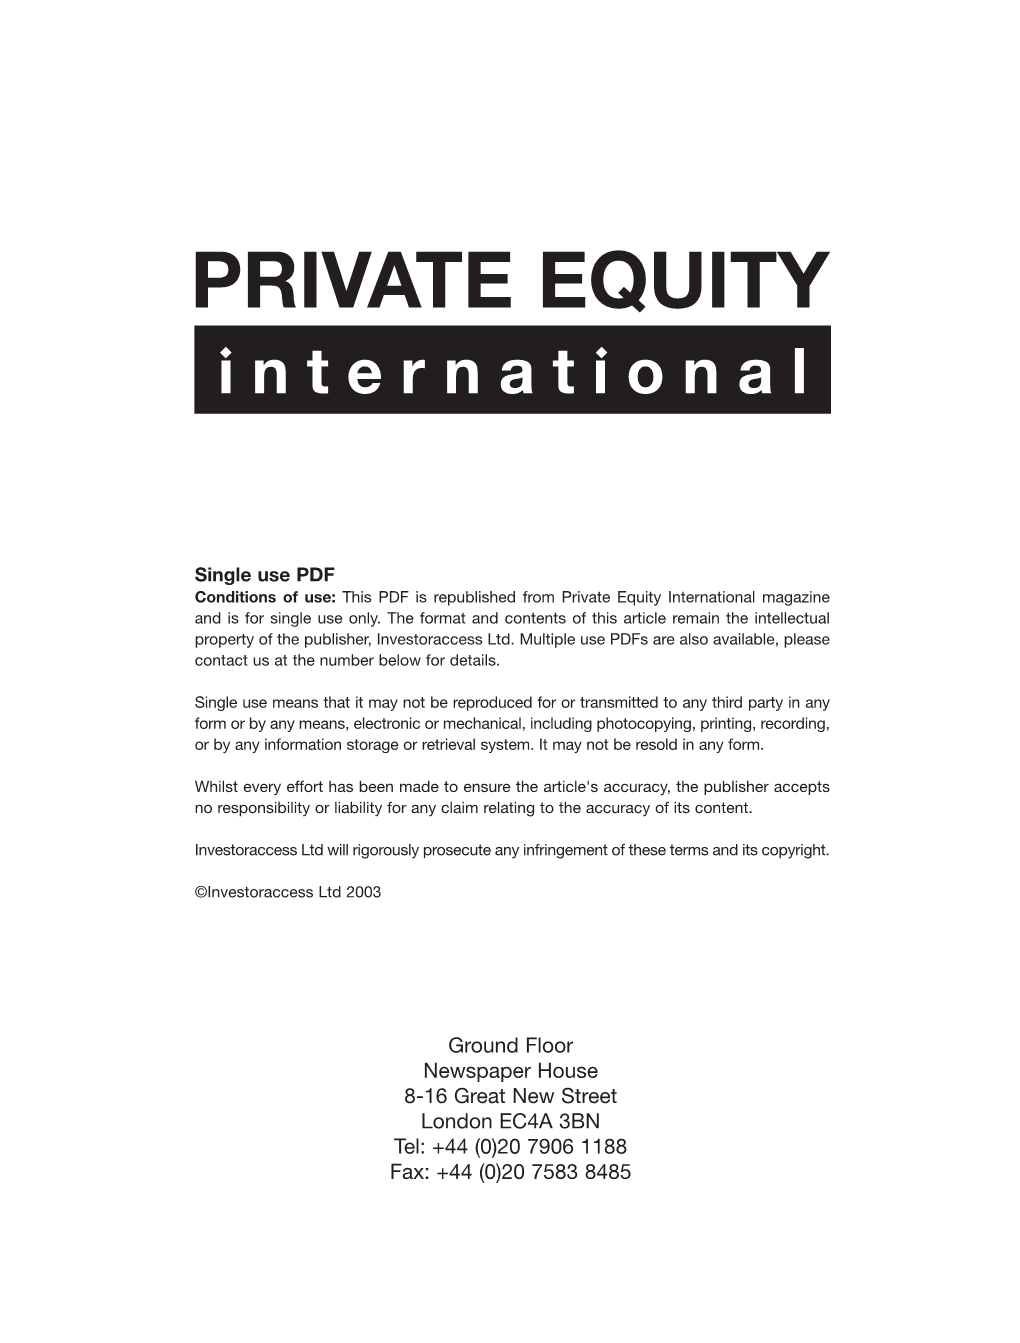 PRIVATE EQUITY International